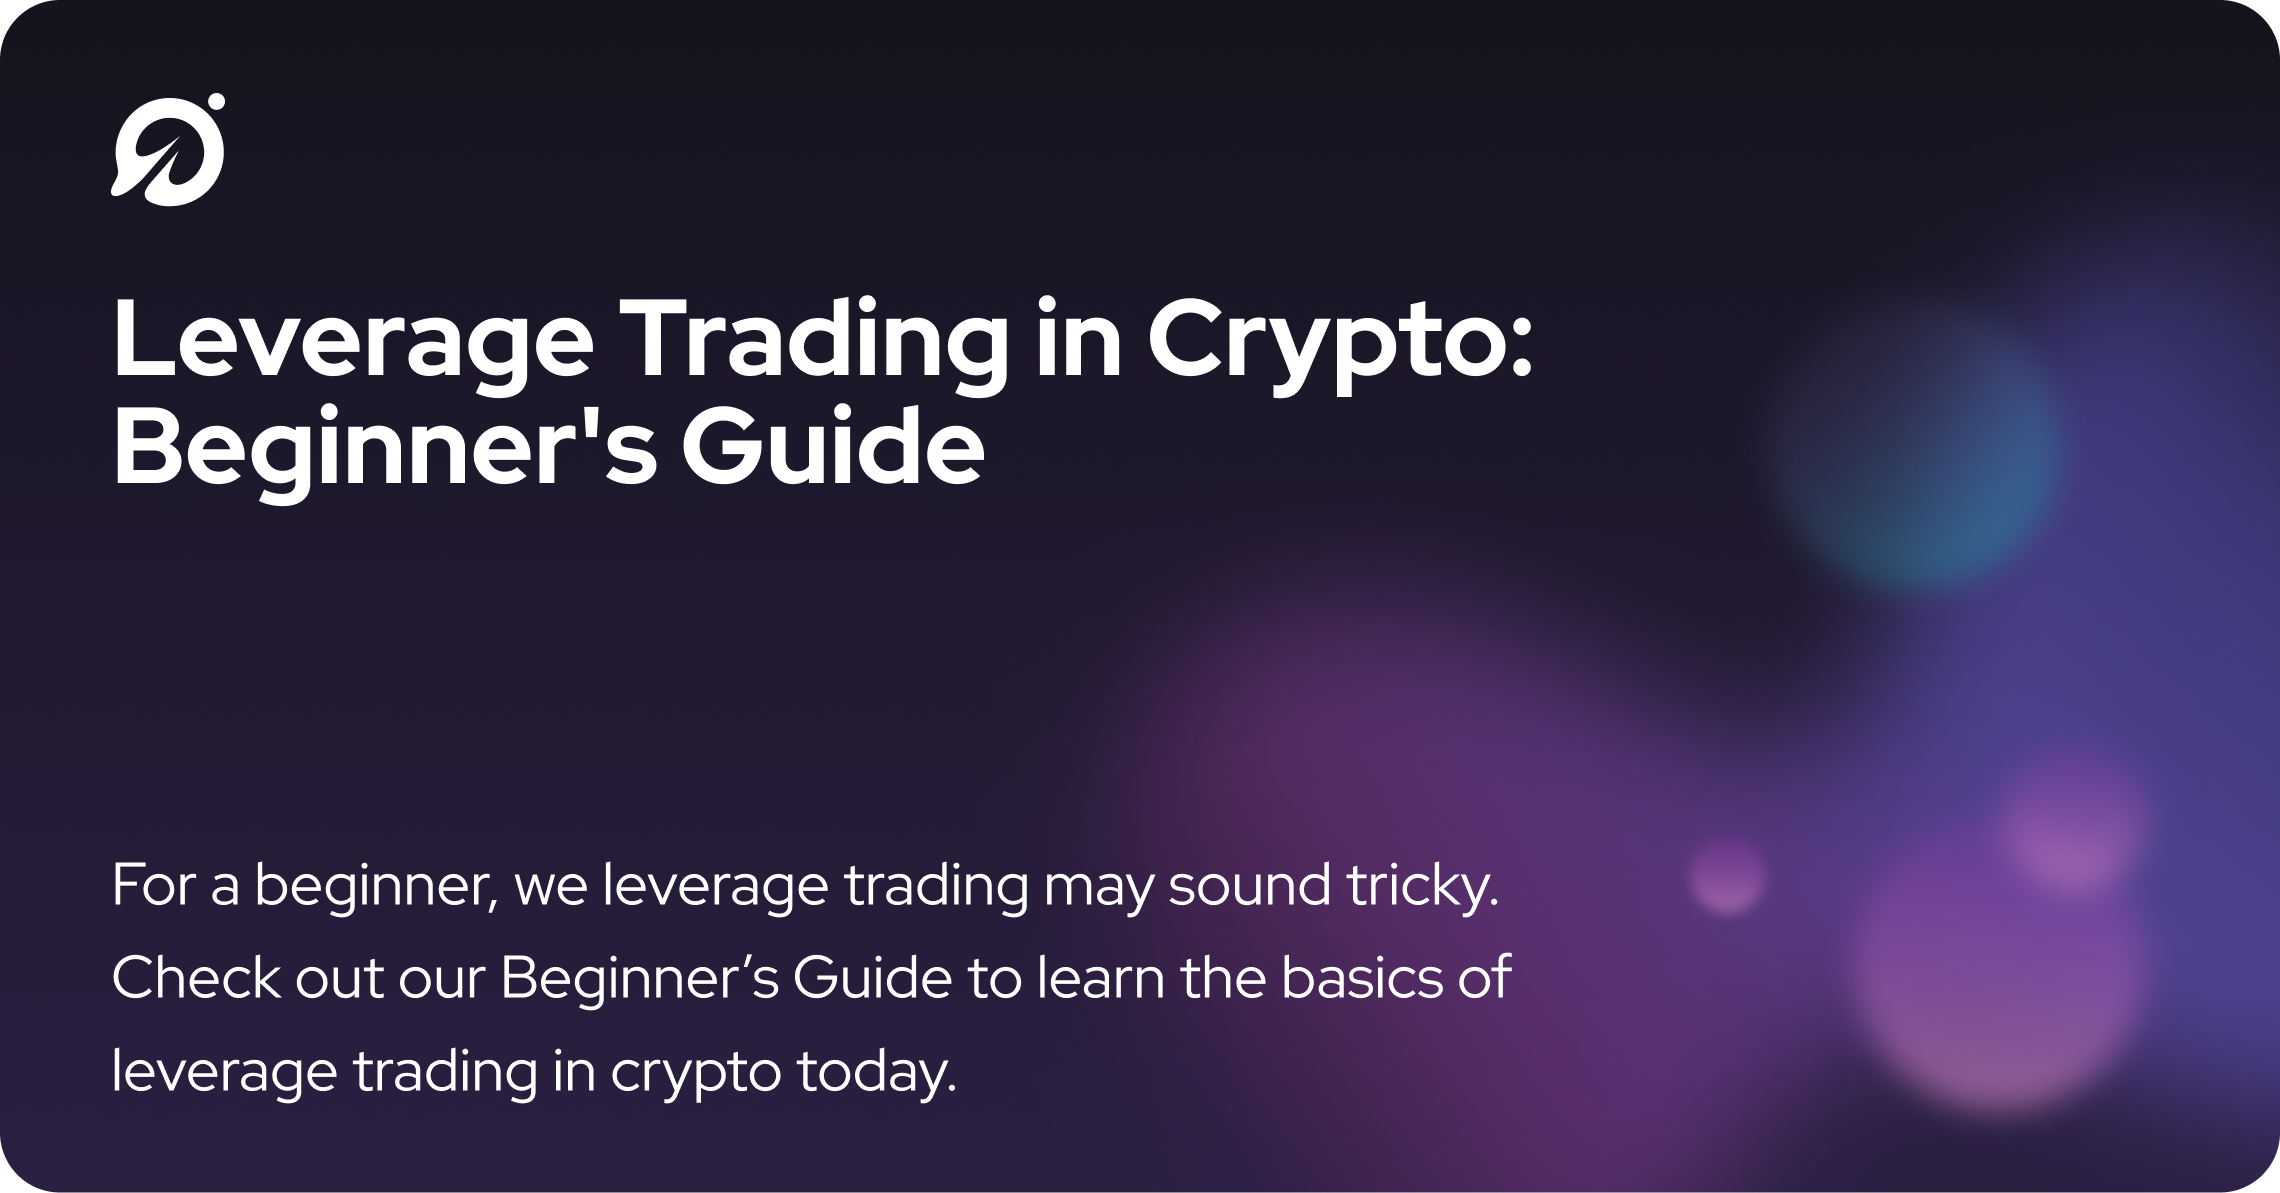 Leverage Trading in Crypto: Beginner's Guide